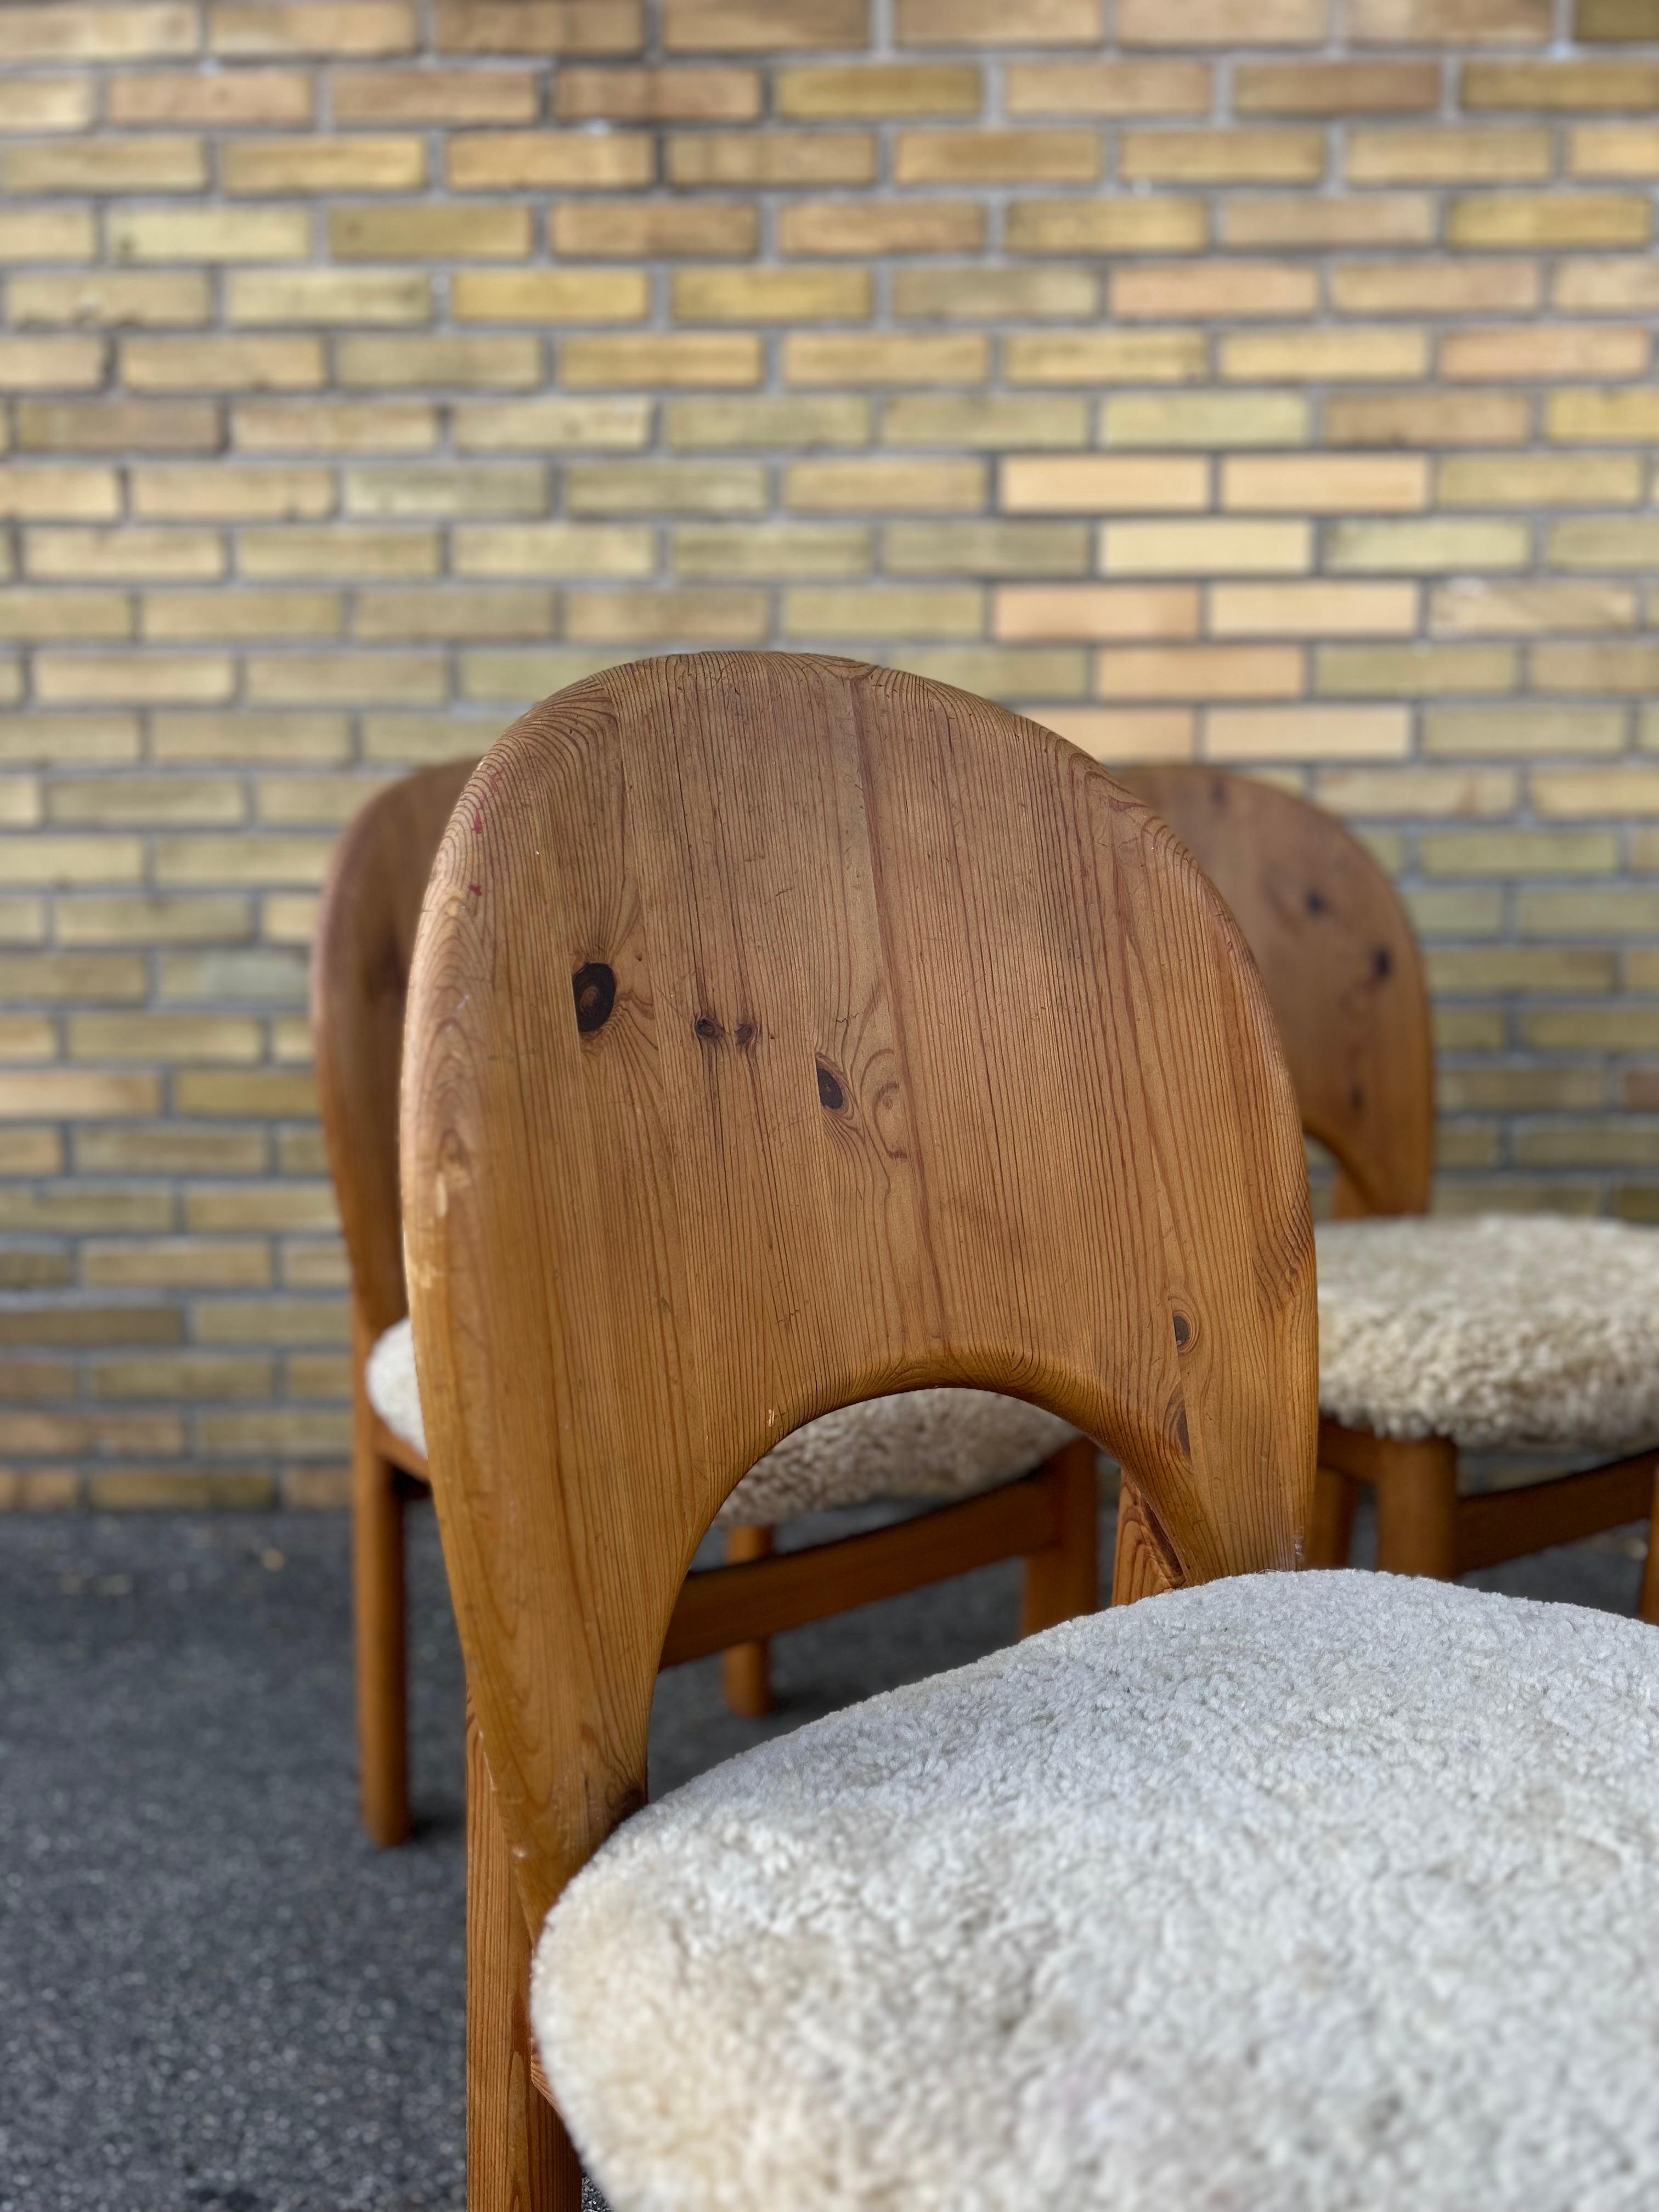 Rare set of six sculptural solid pine dining chairs with a later upholstery in lamb skin made by Danish manufacturer Glostrup Møbelfabrik in Denmark the 1960’s.
The chairs have been newly upholstered in Skandilock lamb skin.
The chairs are the